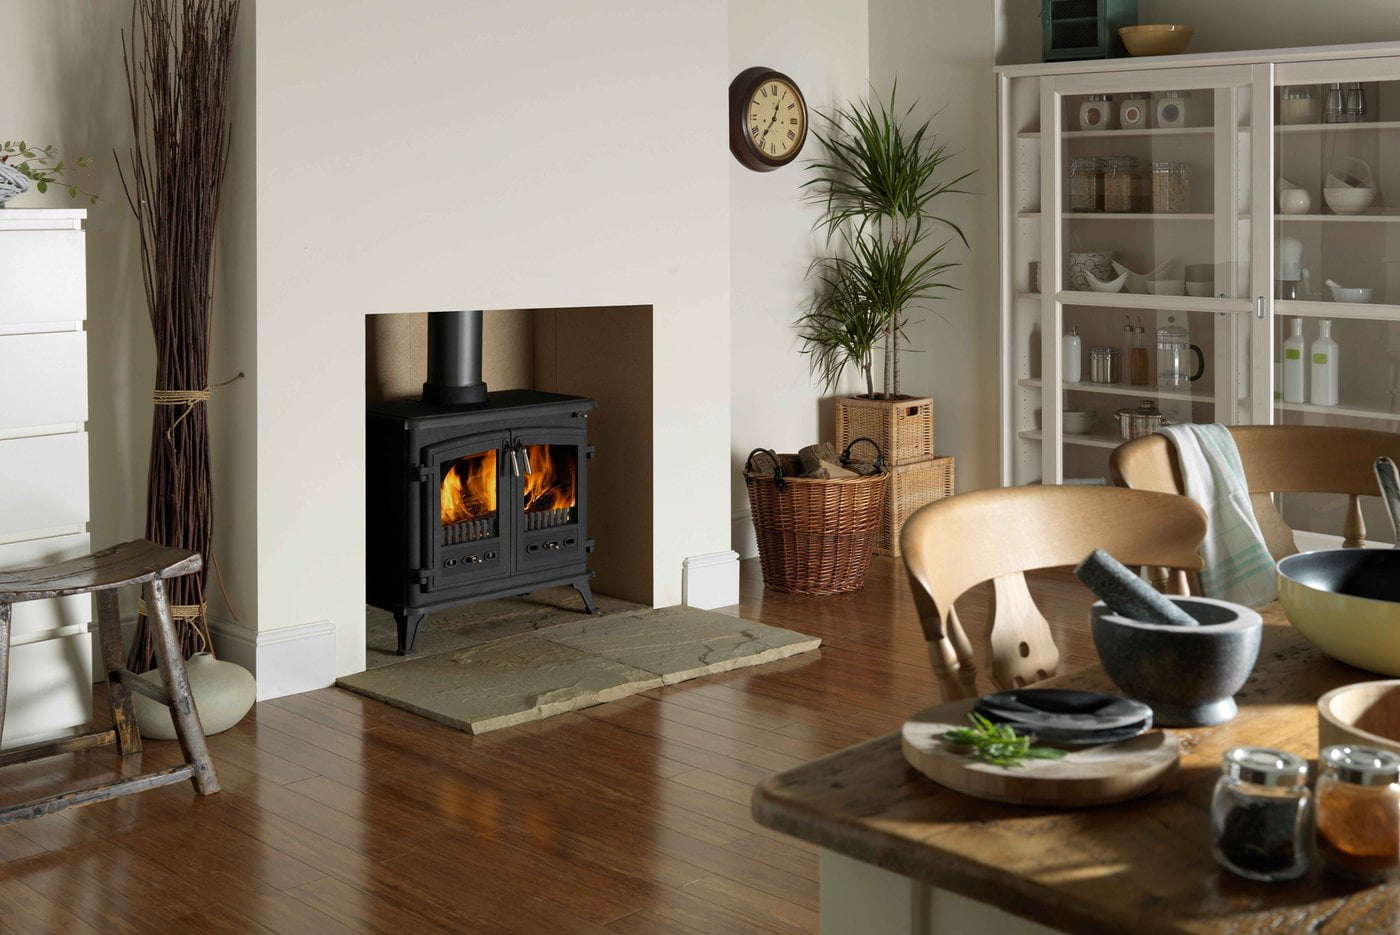 Benefits of wood fireplaces